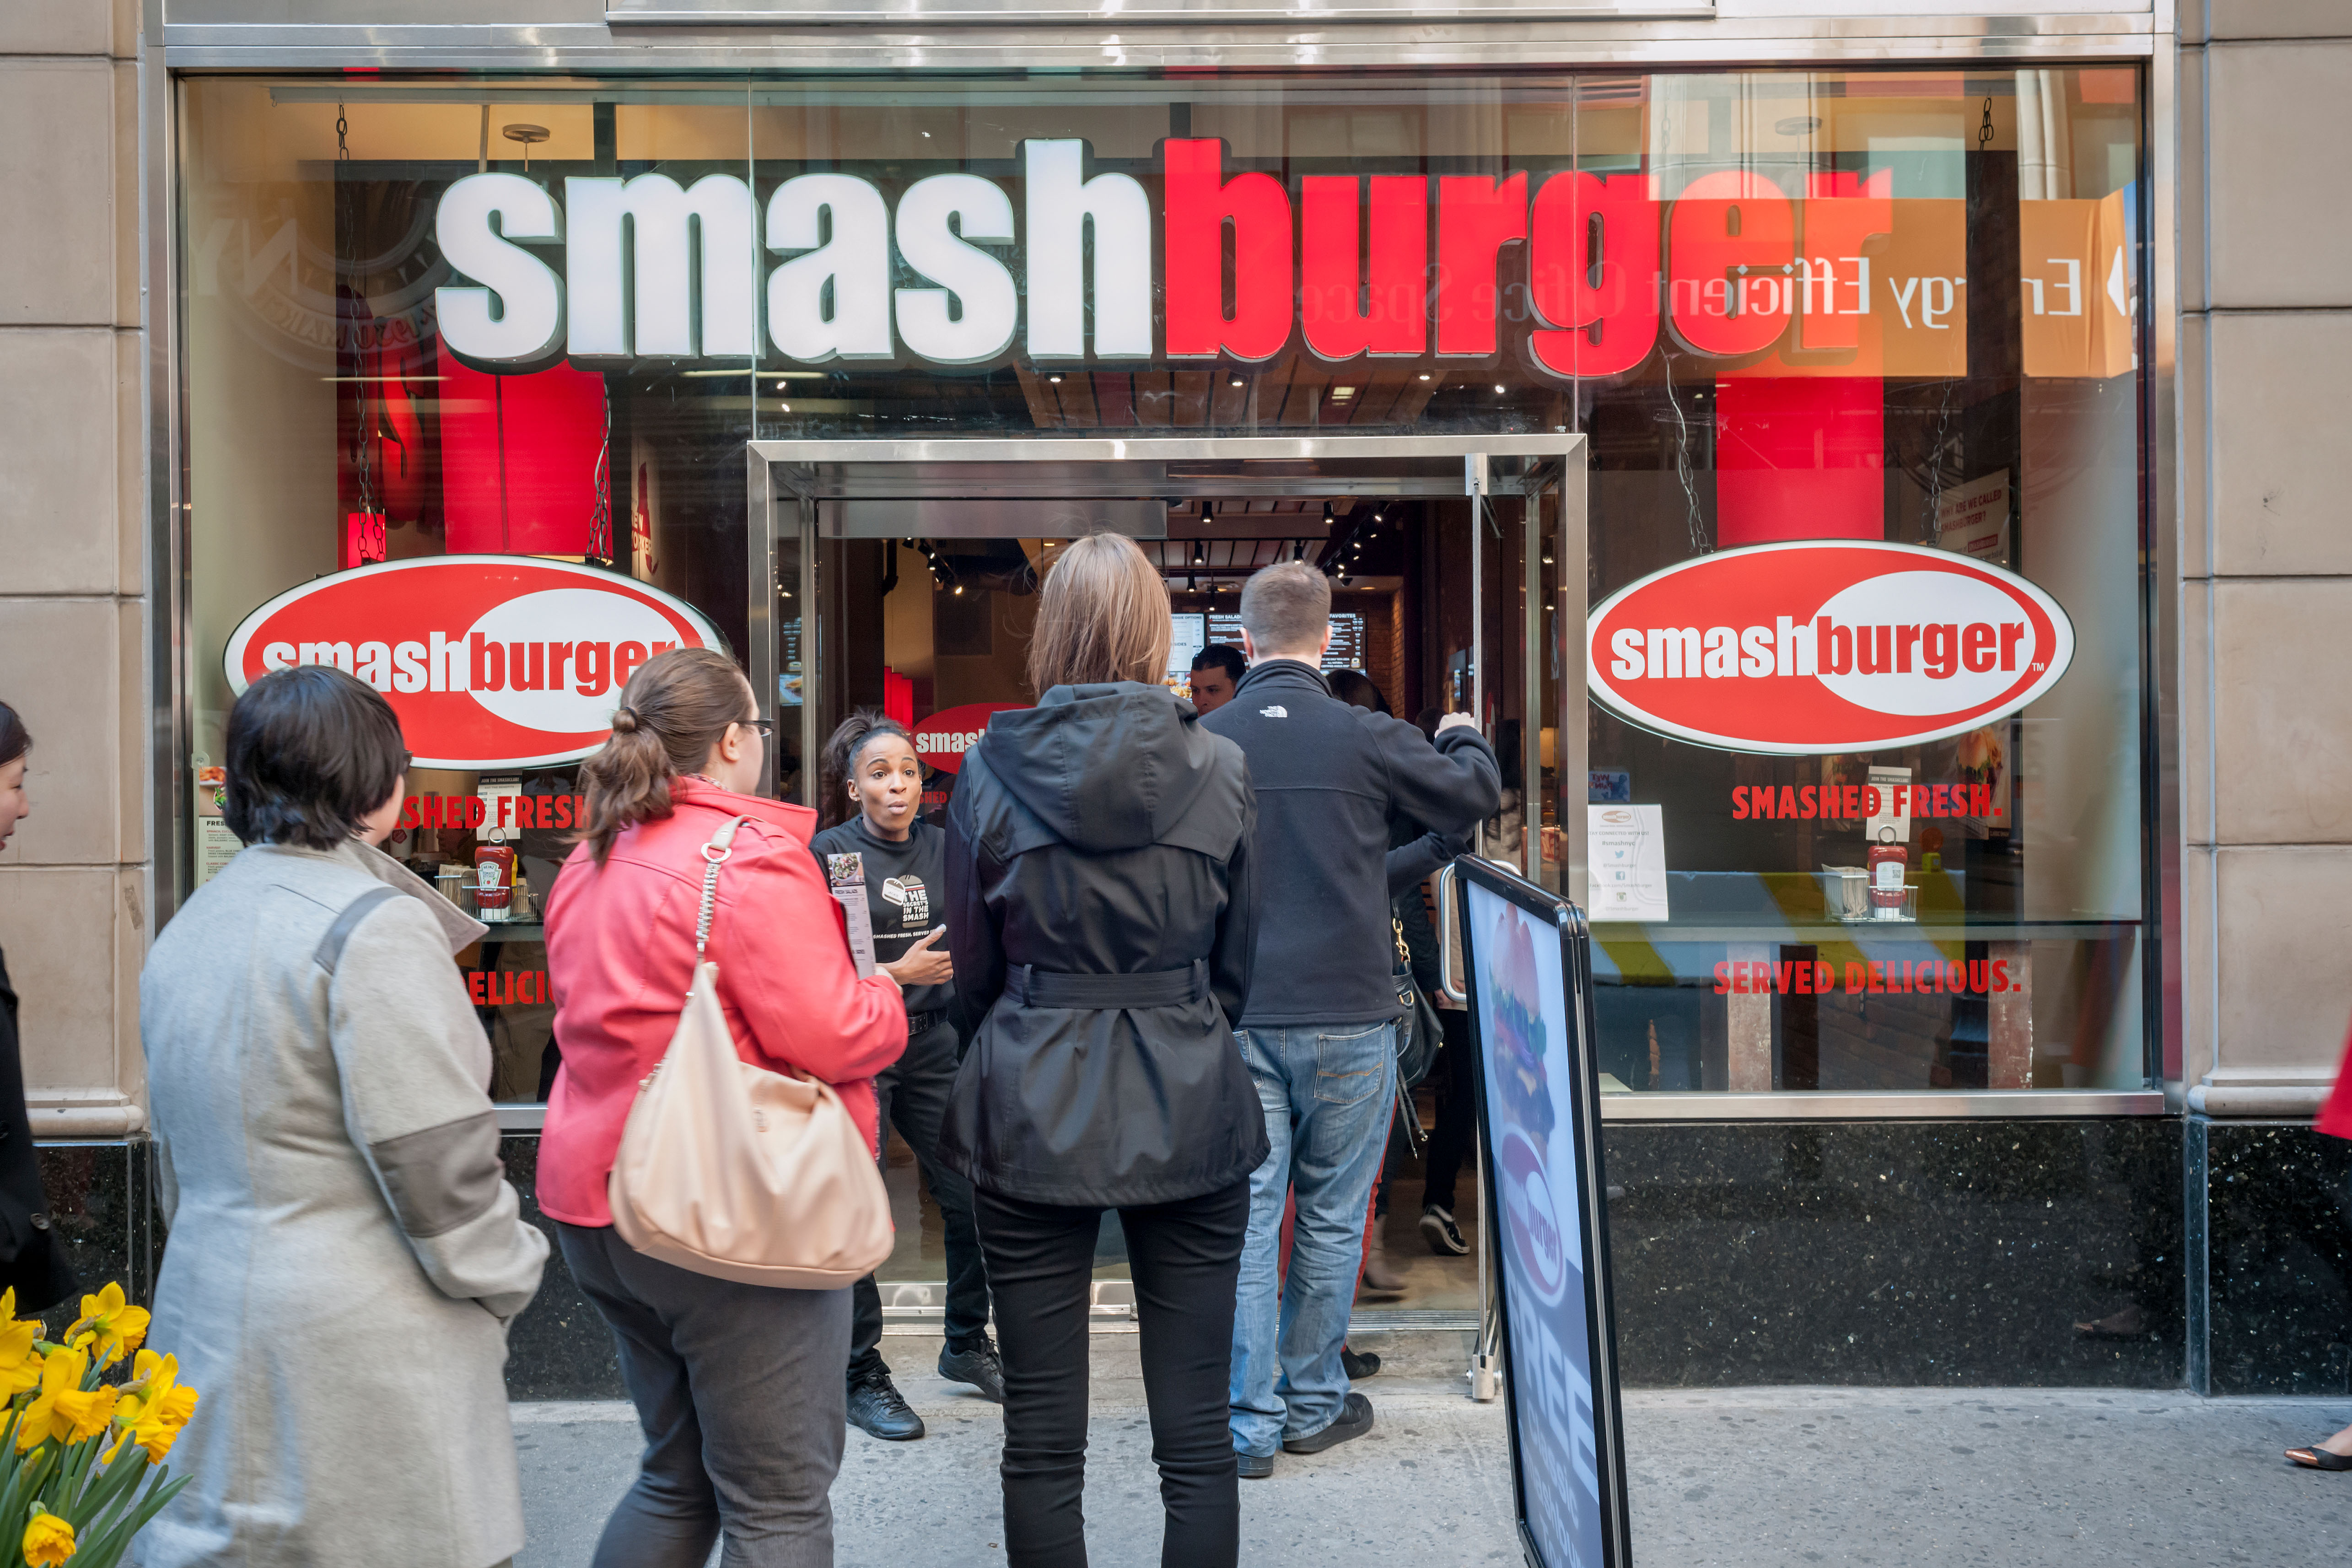 Burger lovers from far and wide descend on the new Smashburger restaurant in New York